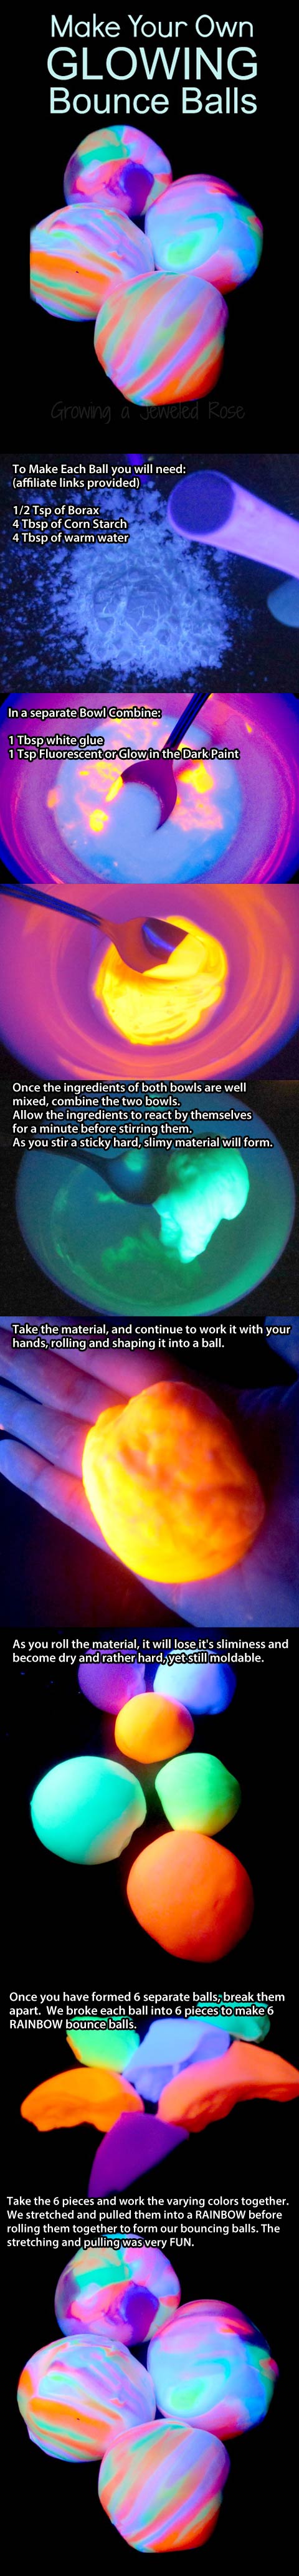 Make your own glowing bounce balls!